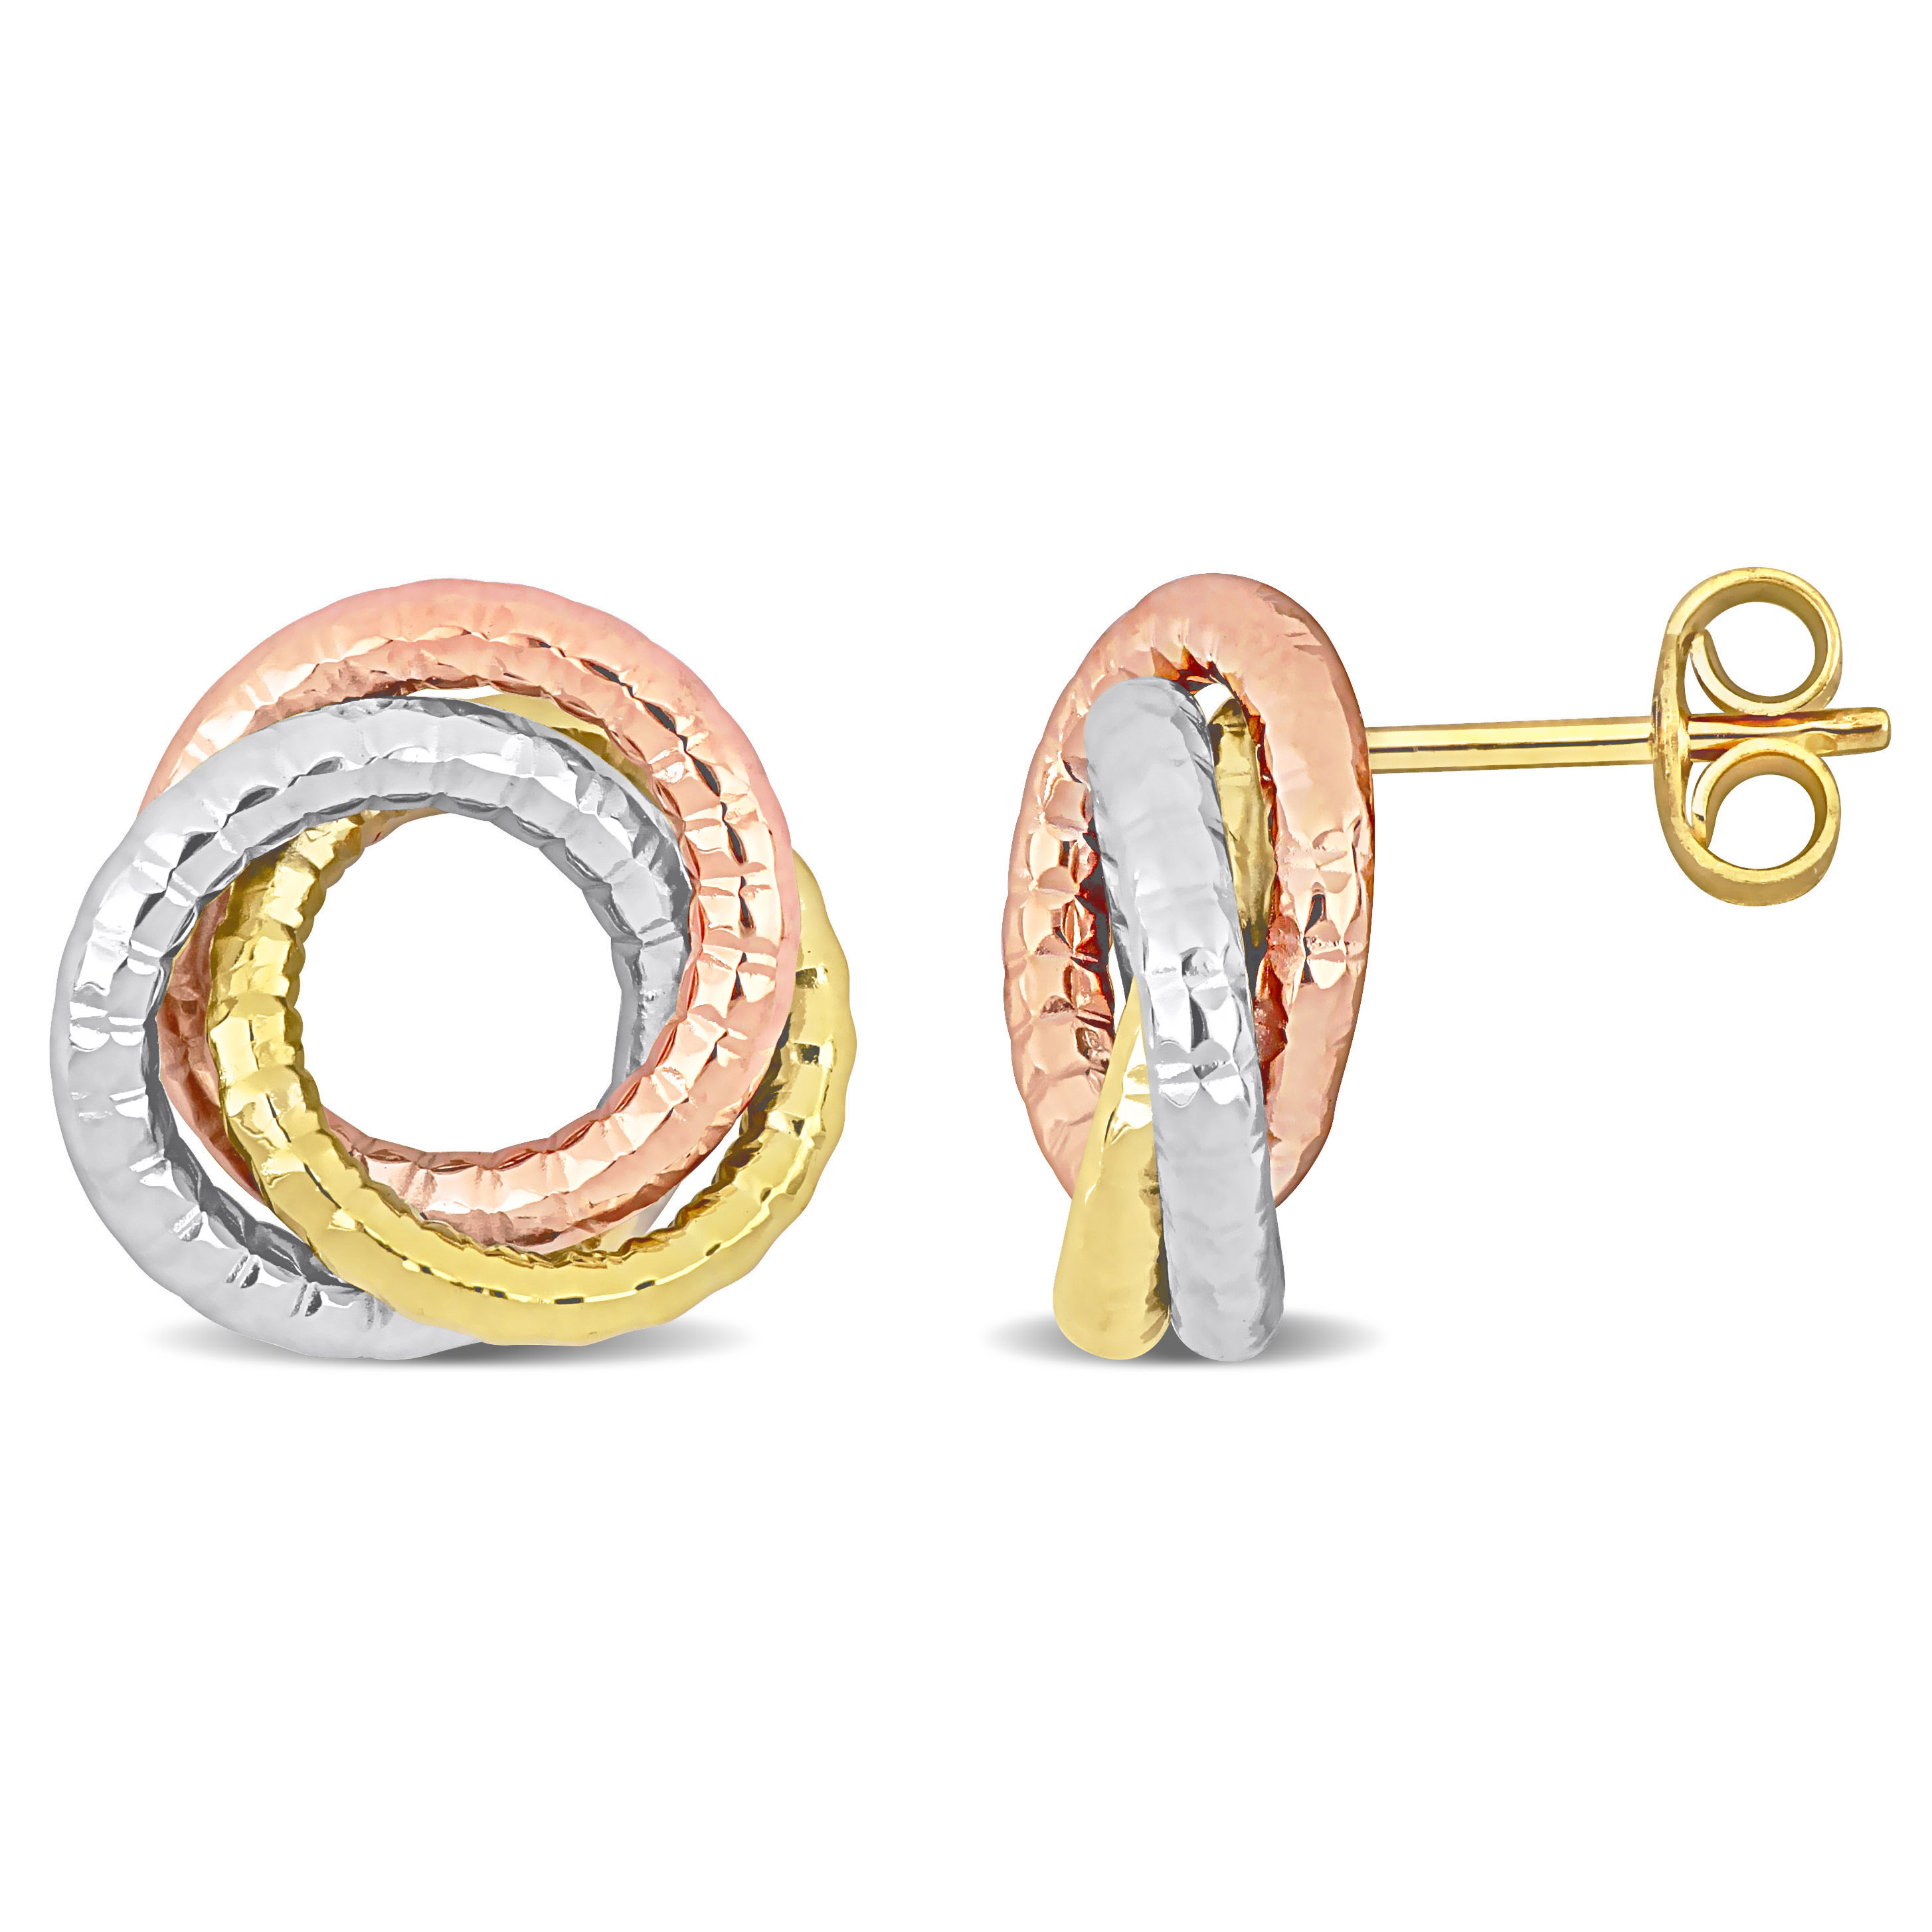 Open Love Knot Stud Earrings in 3-Tone 10k Yellow, Rose and White Gold